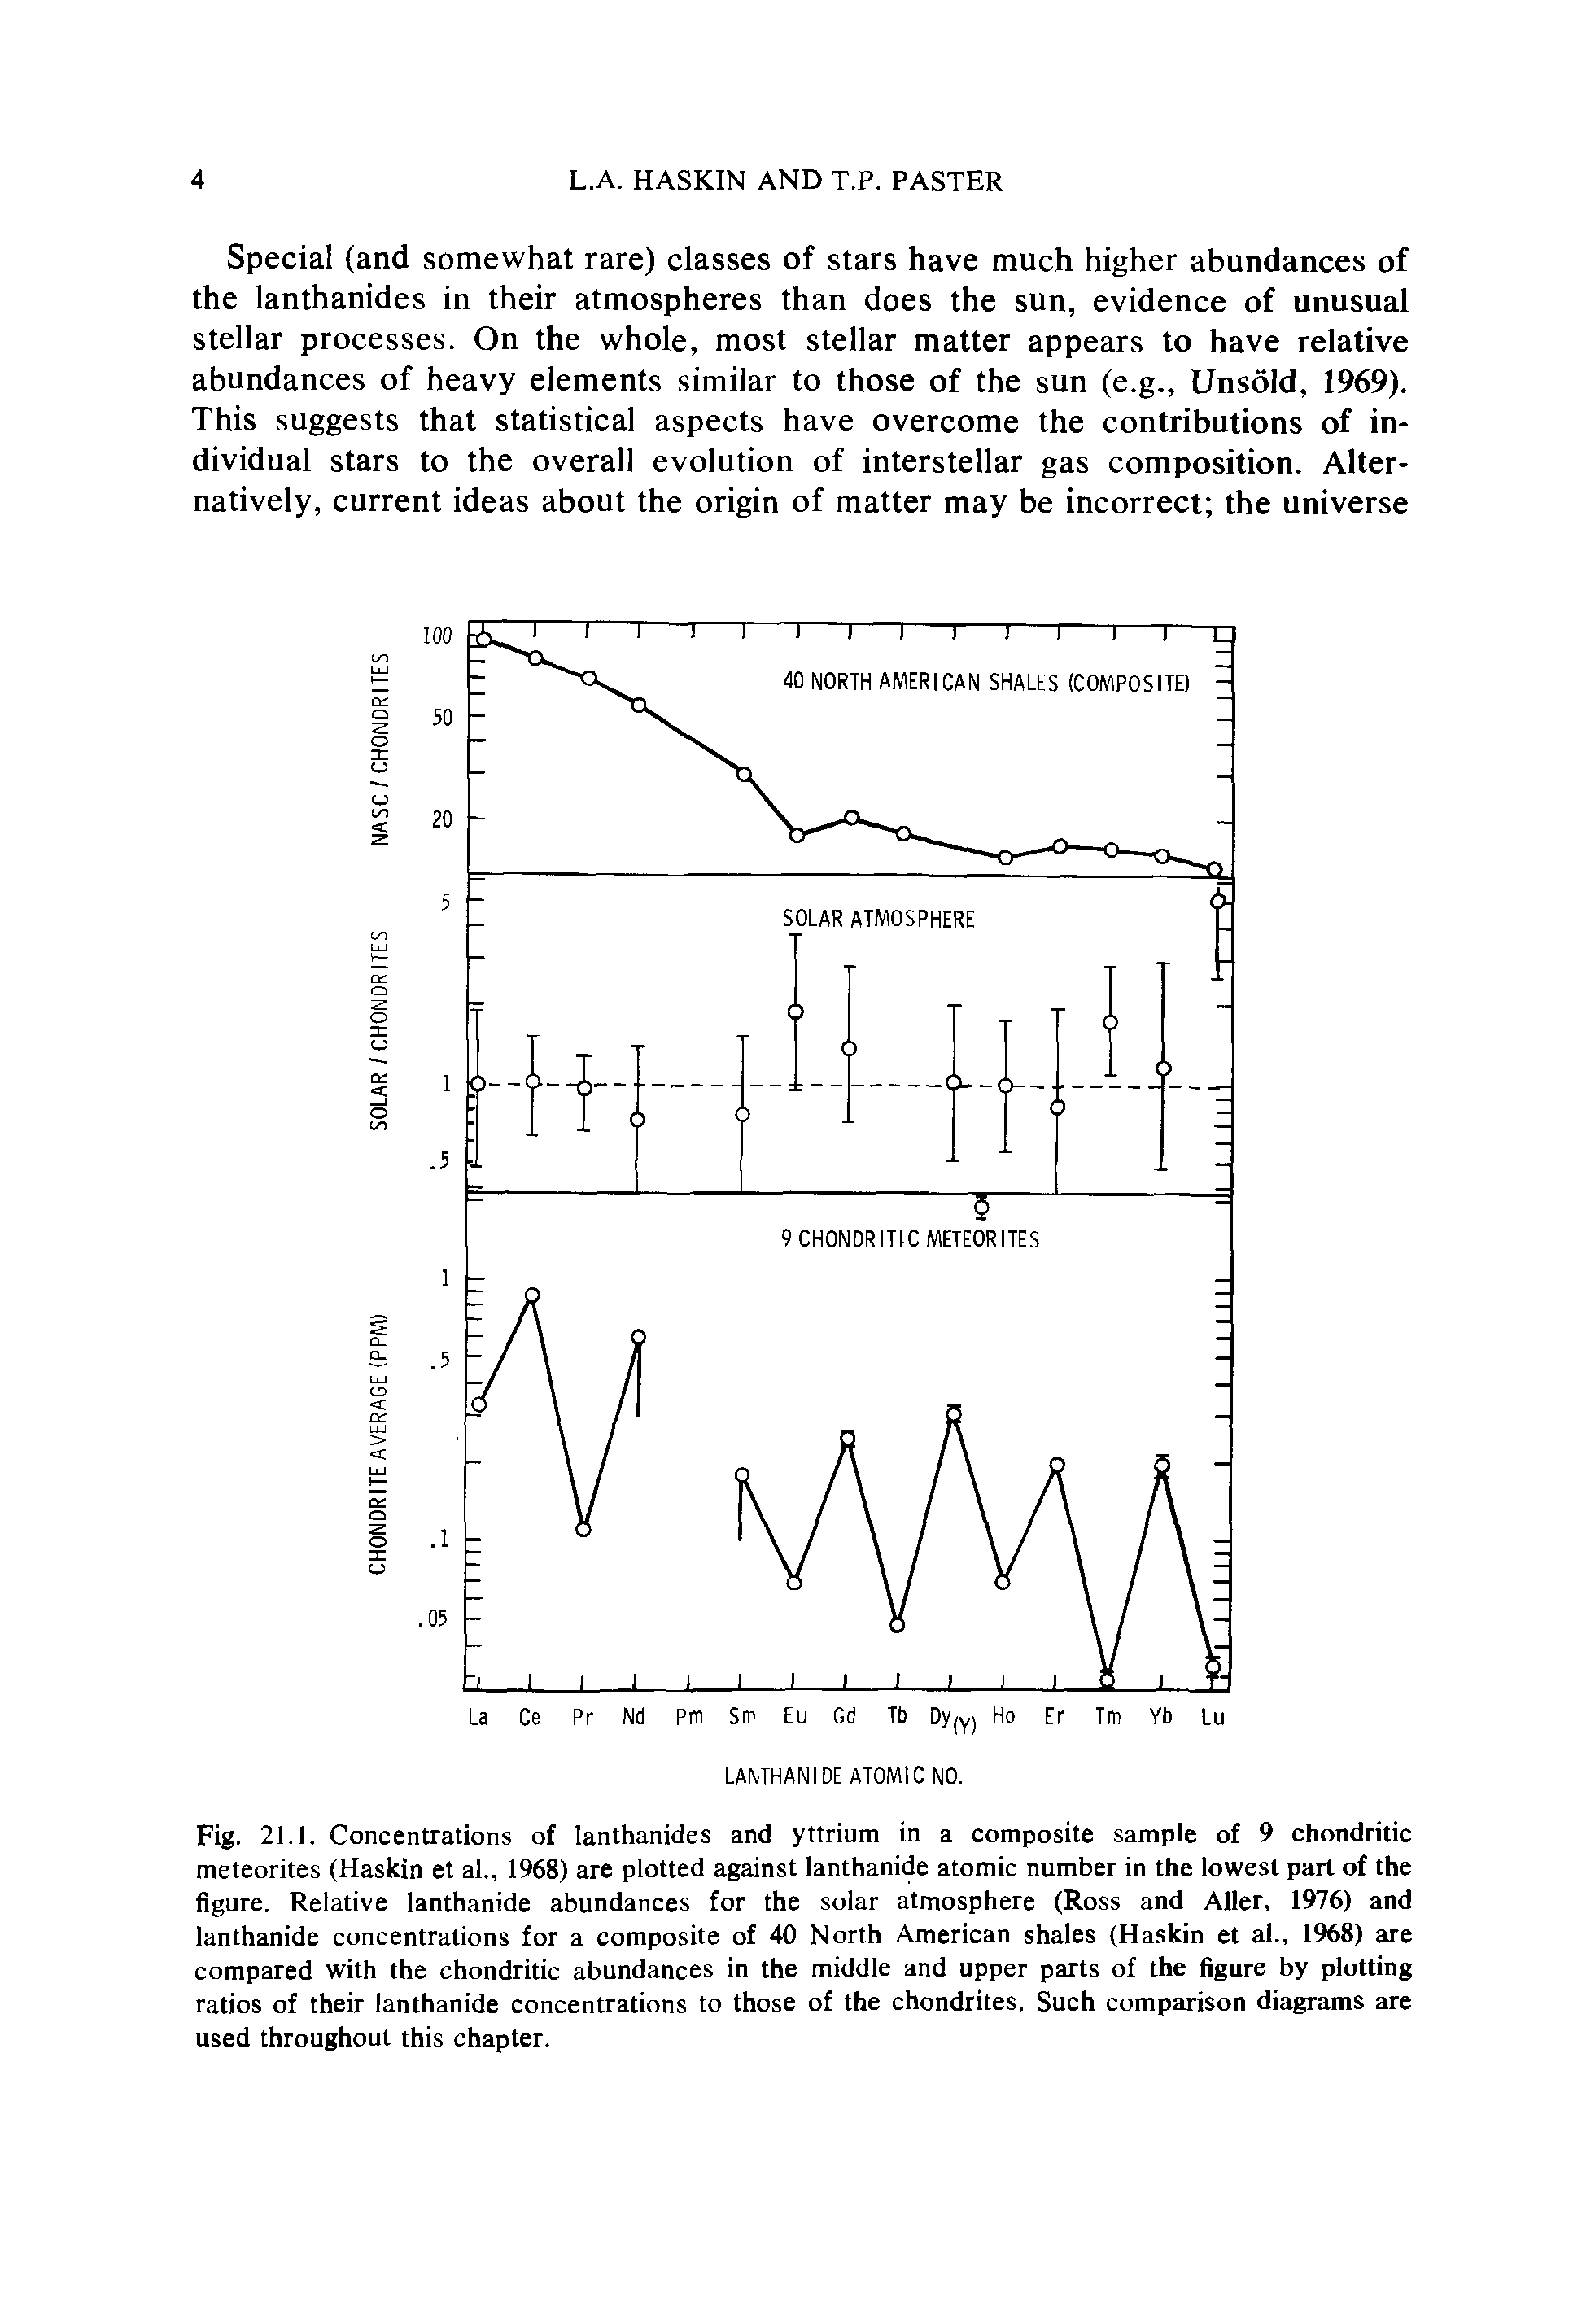 Fig. 21.1. Concentrations of lanthanides and yttrium in a composite sample of 9 chondritic meteorites (Haskin et al., 1%8) are plotted against lanthanide atomic number in the lowest part of the figure. Relative lanthanide abundances for the solar atmosphere (Ross and Aller, 1976) and lanthanide concentrations for a composite of 40 North American shales (Haskin et al., 1968) are compared with the chondritic abundances in the middle and upper parts of the figure by plotting ratios of their lanthanide concentrations to those of the chondrites. Such comparison diagrams are used throughout this chapter.